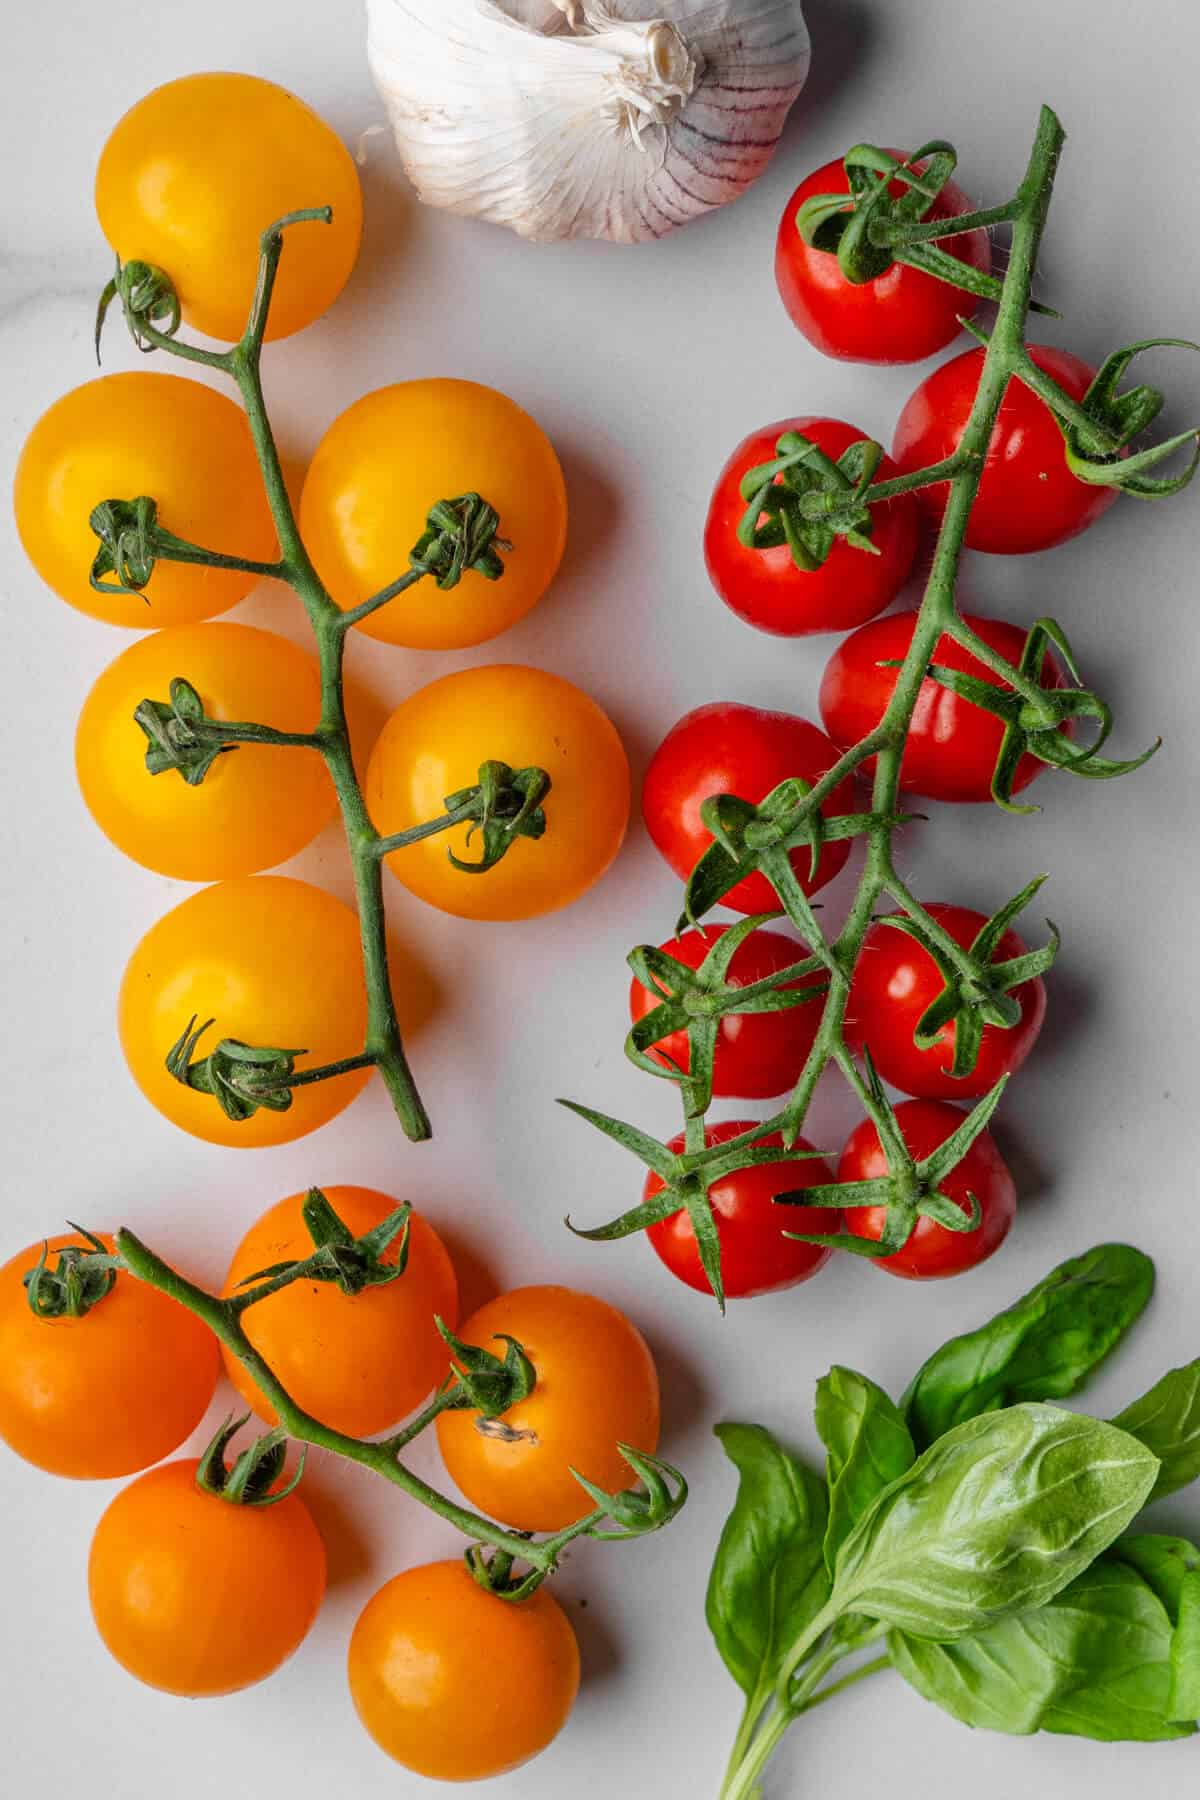 Ingredients used being 3 types of cherry tomatoes, garlic and basil